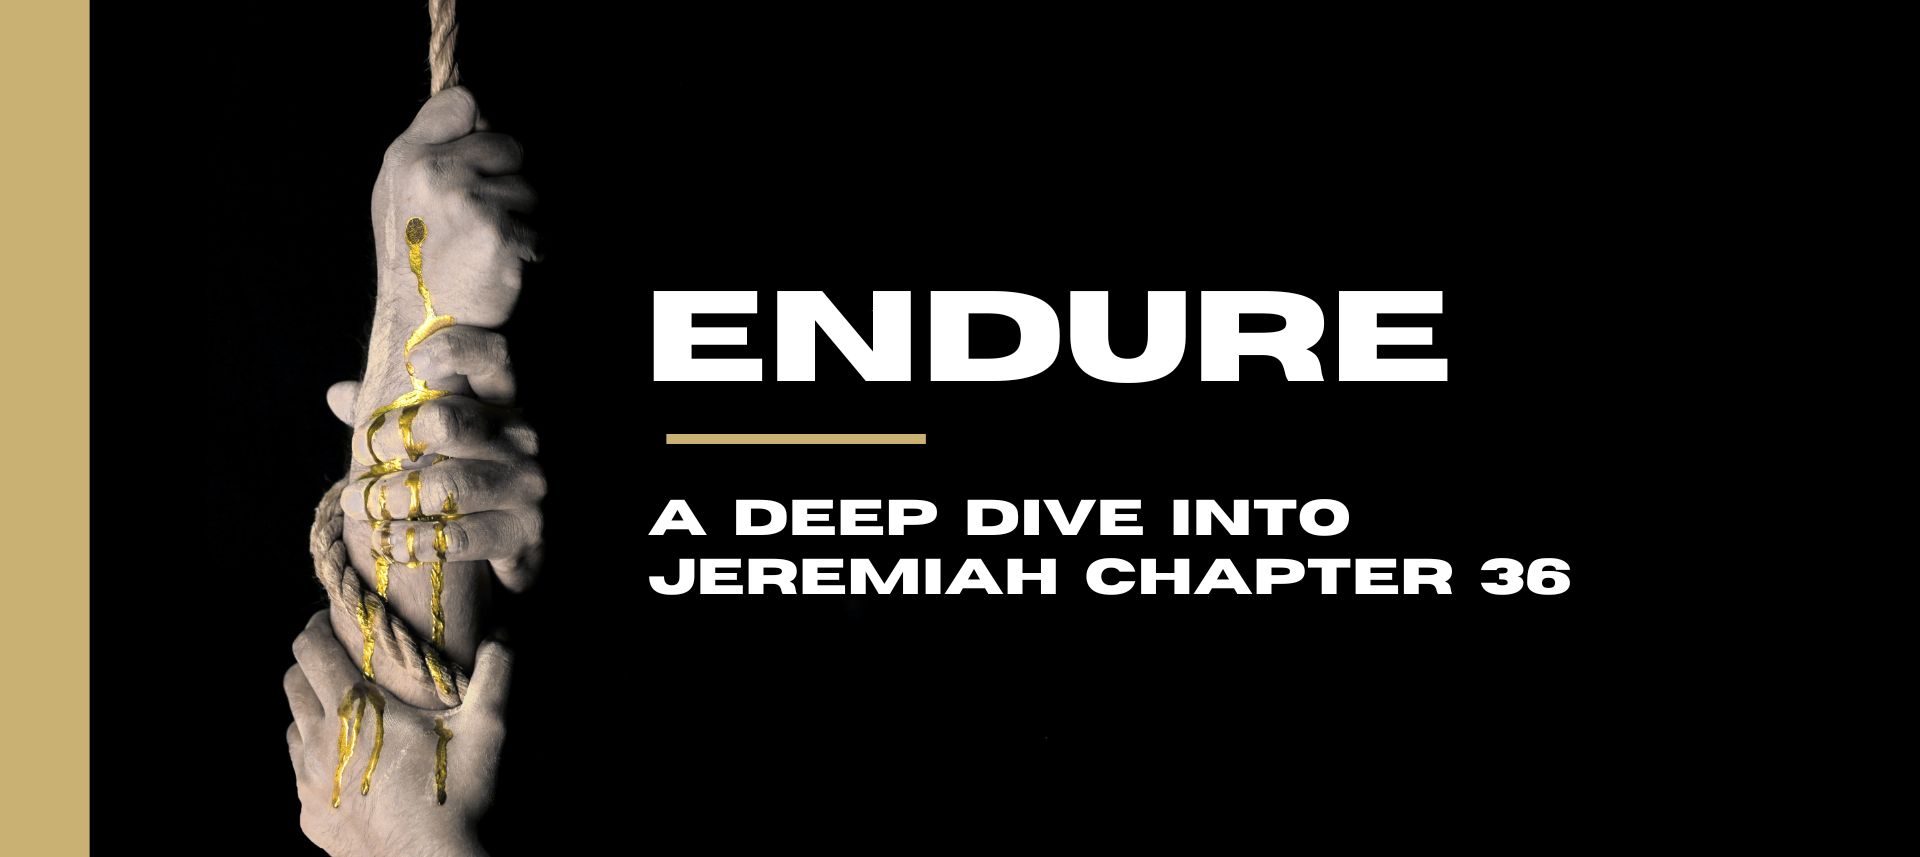 A Deep Dive into Jeremiah Chapter 36